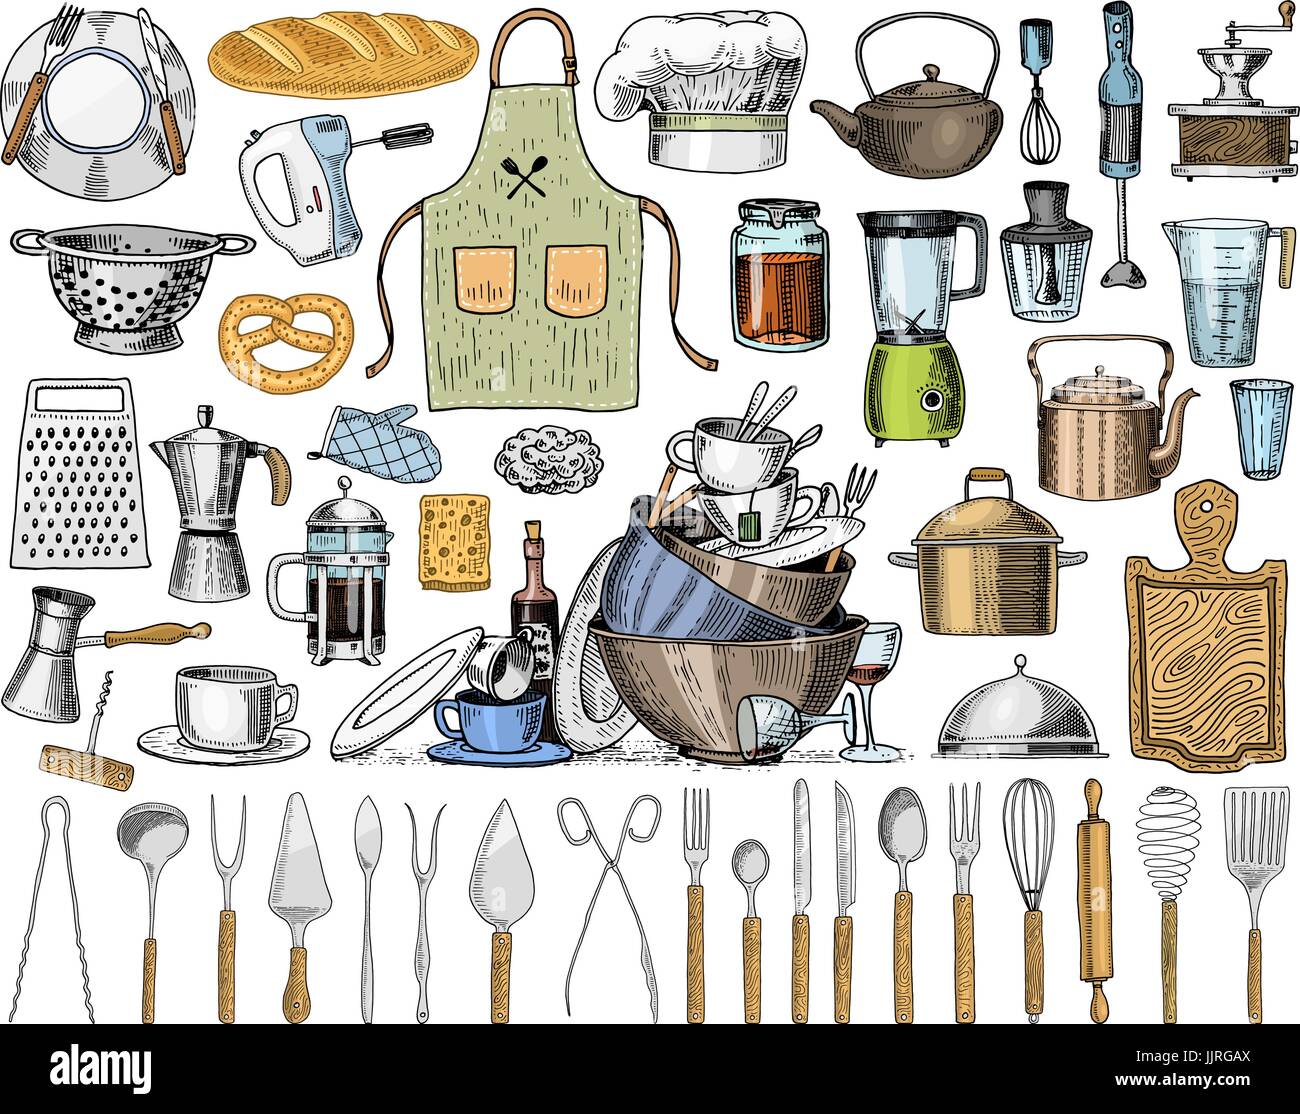 How To Decorate w/ Vintage Kitchen Decor, Rolling Pins & Utensils.